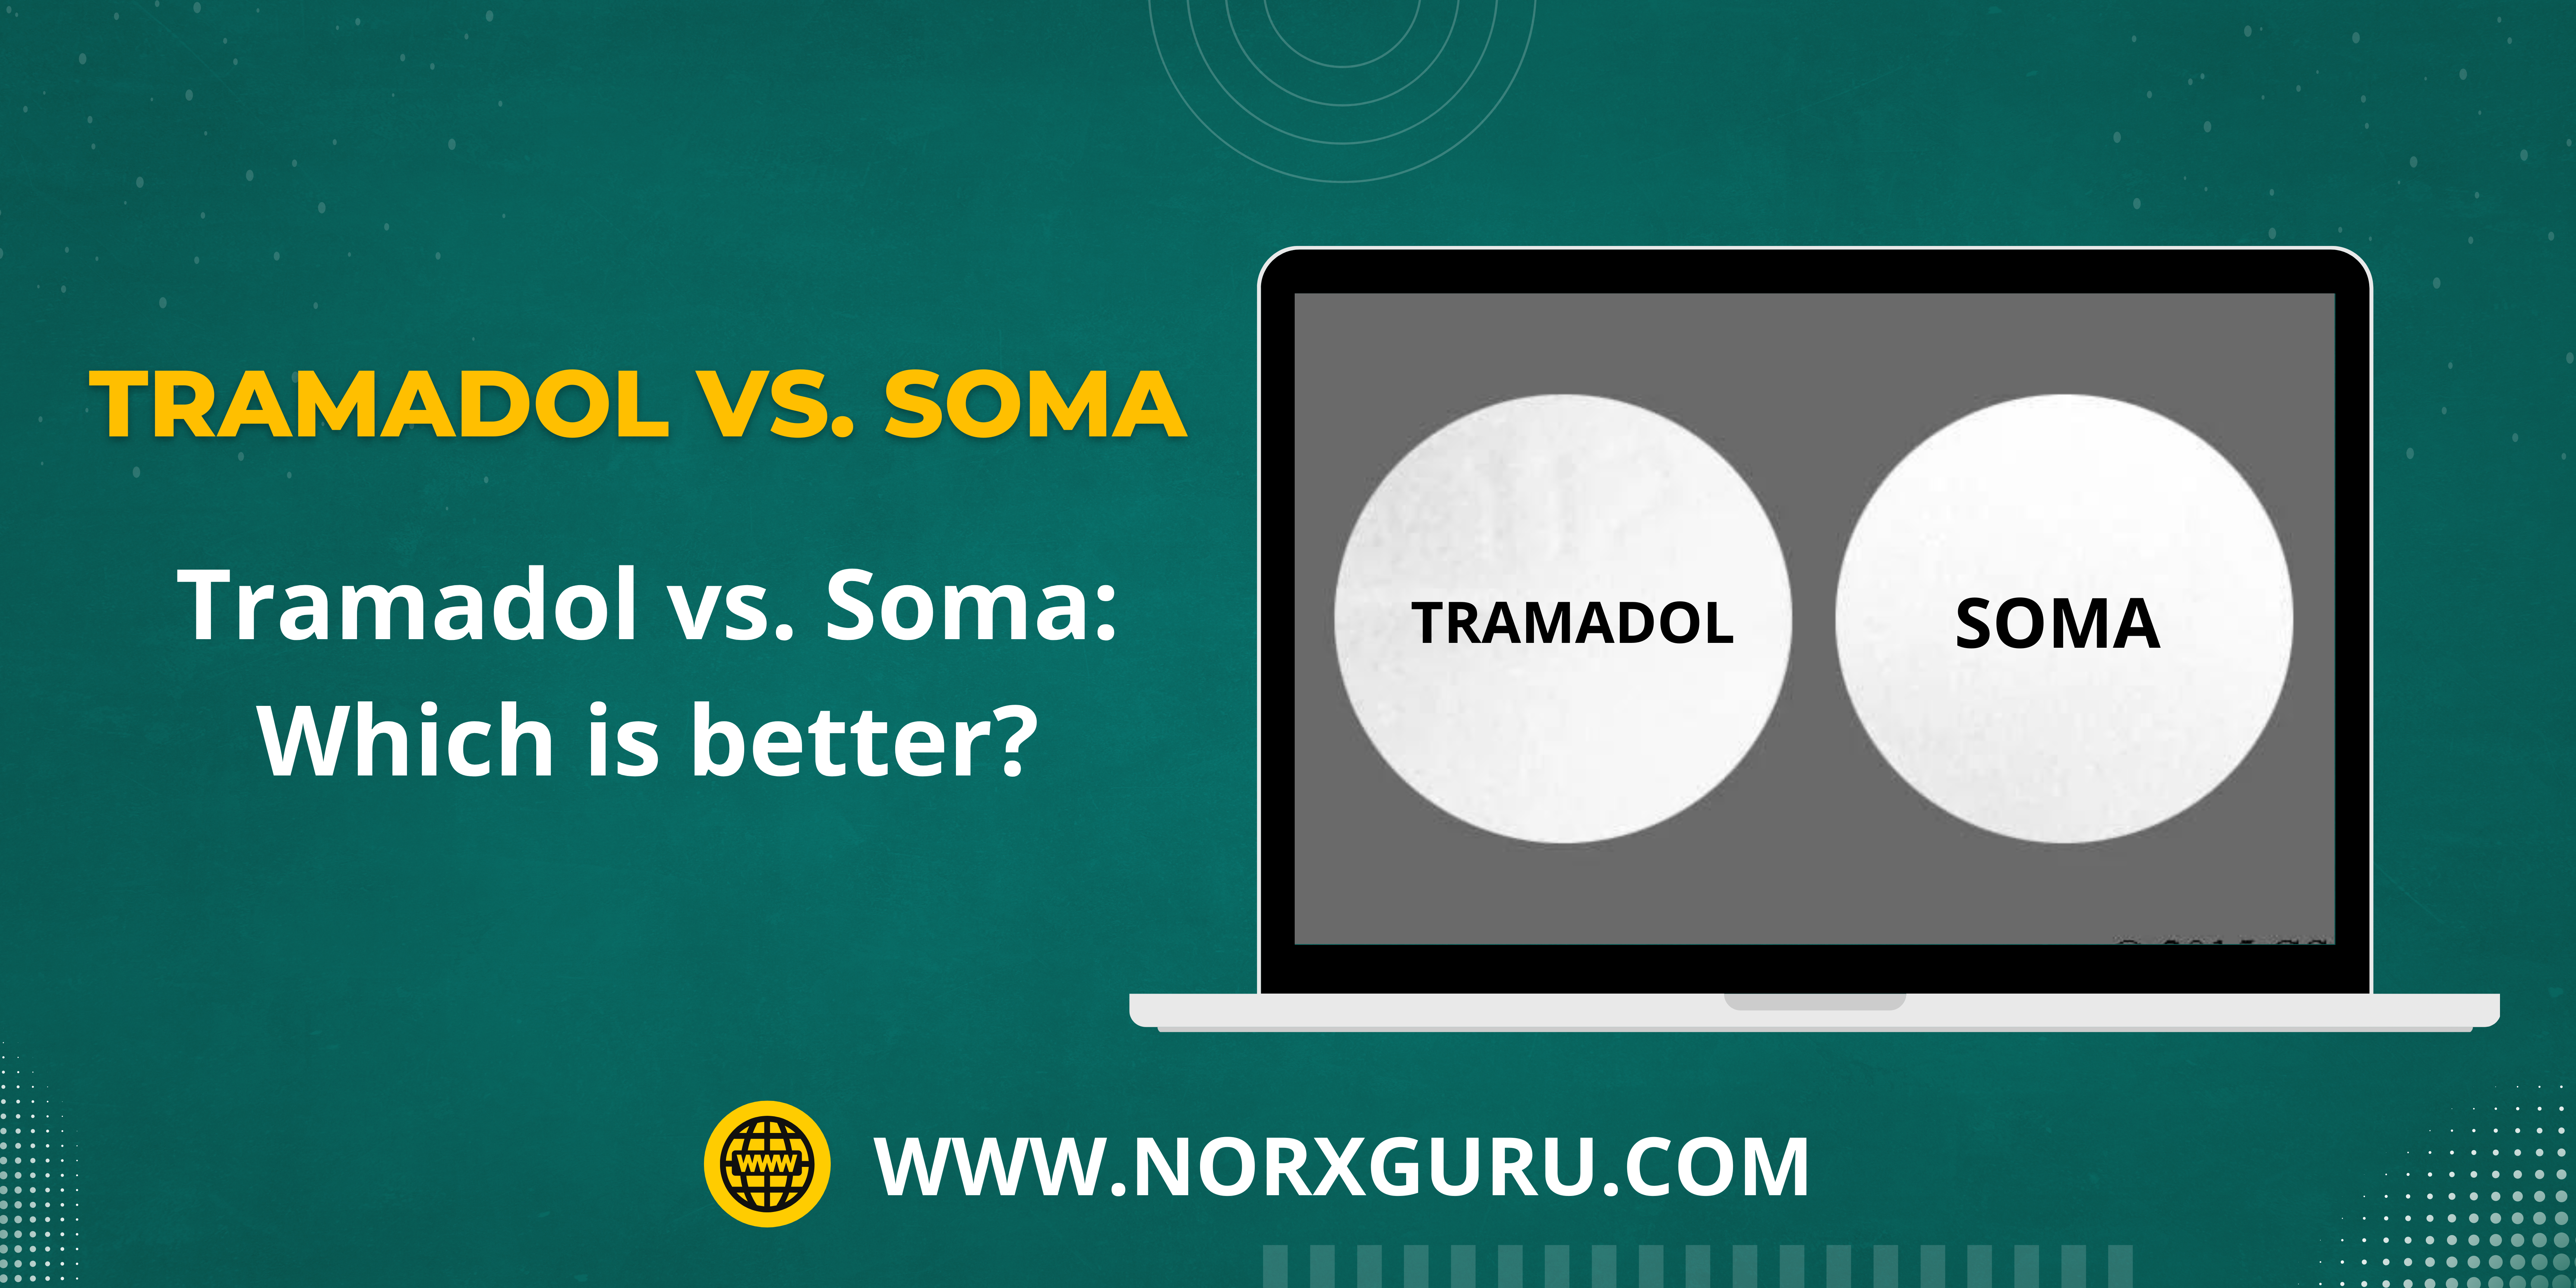 Tramadol vs. Soma: Which is better?